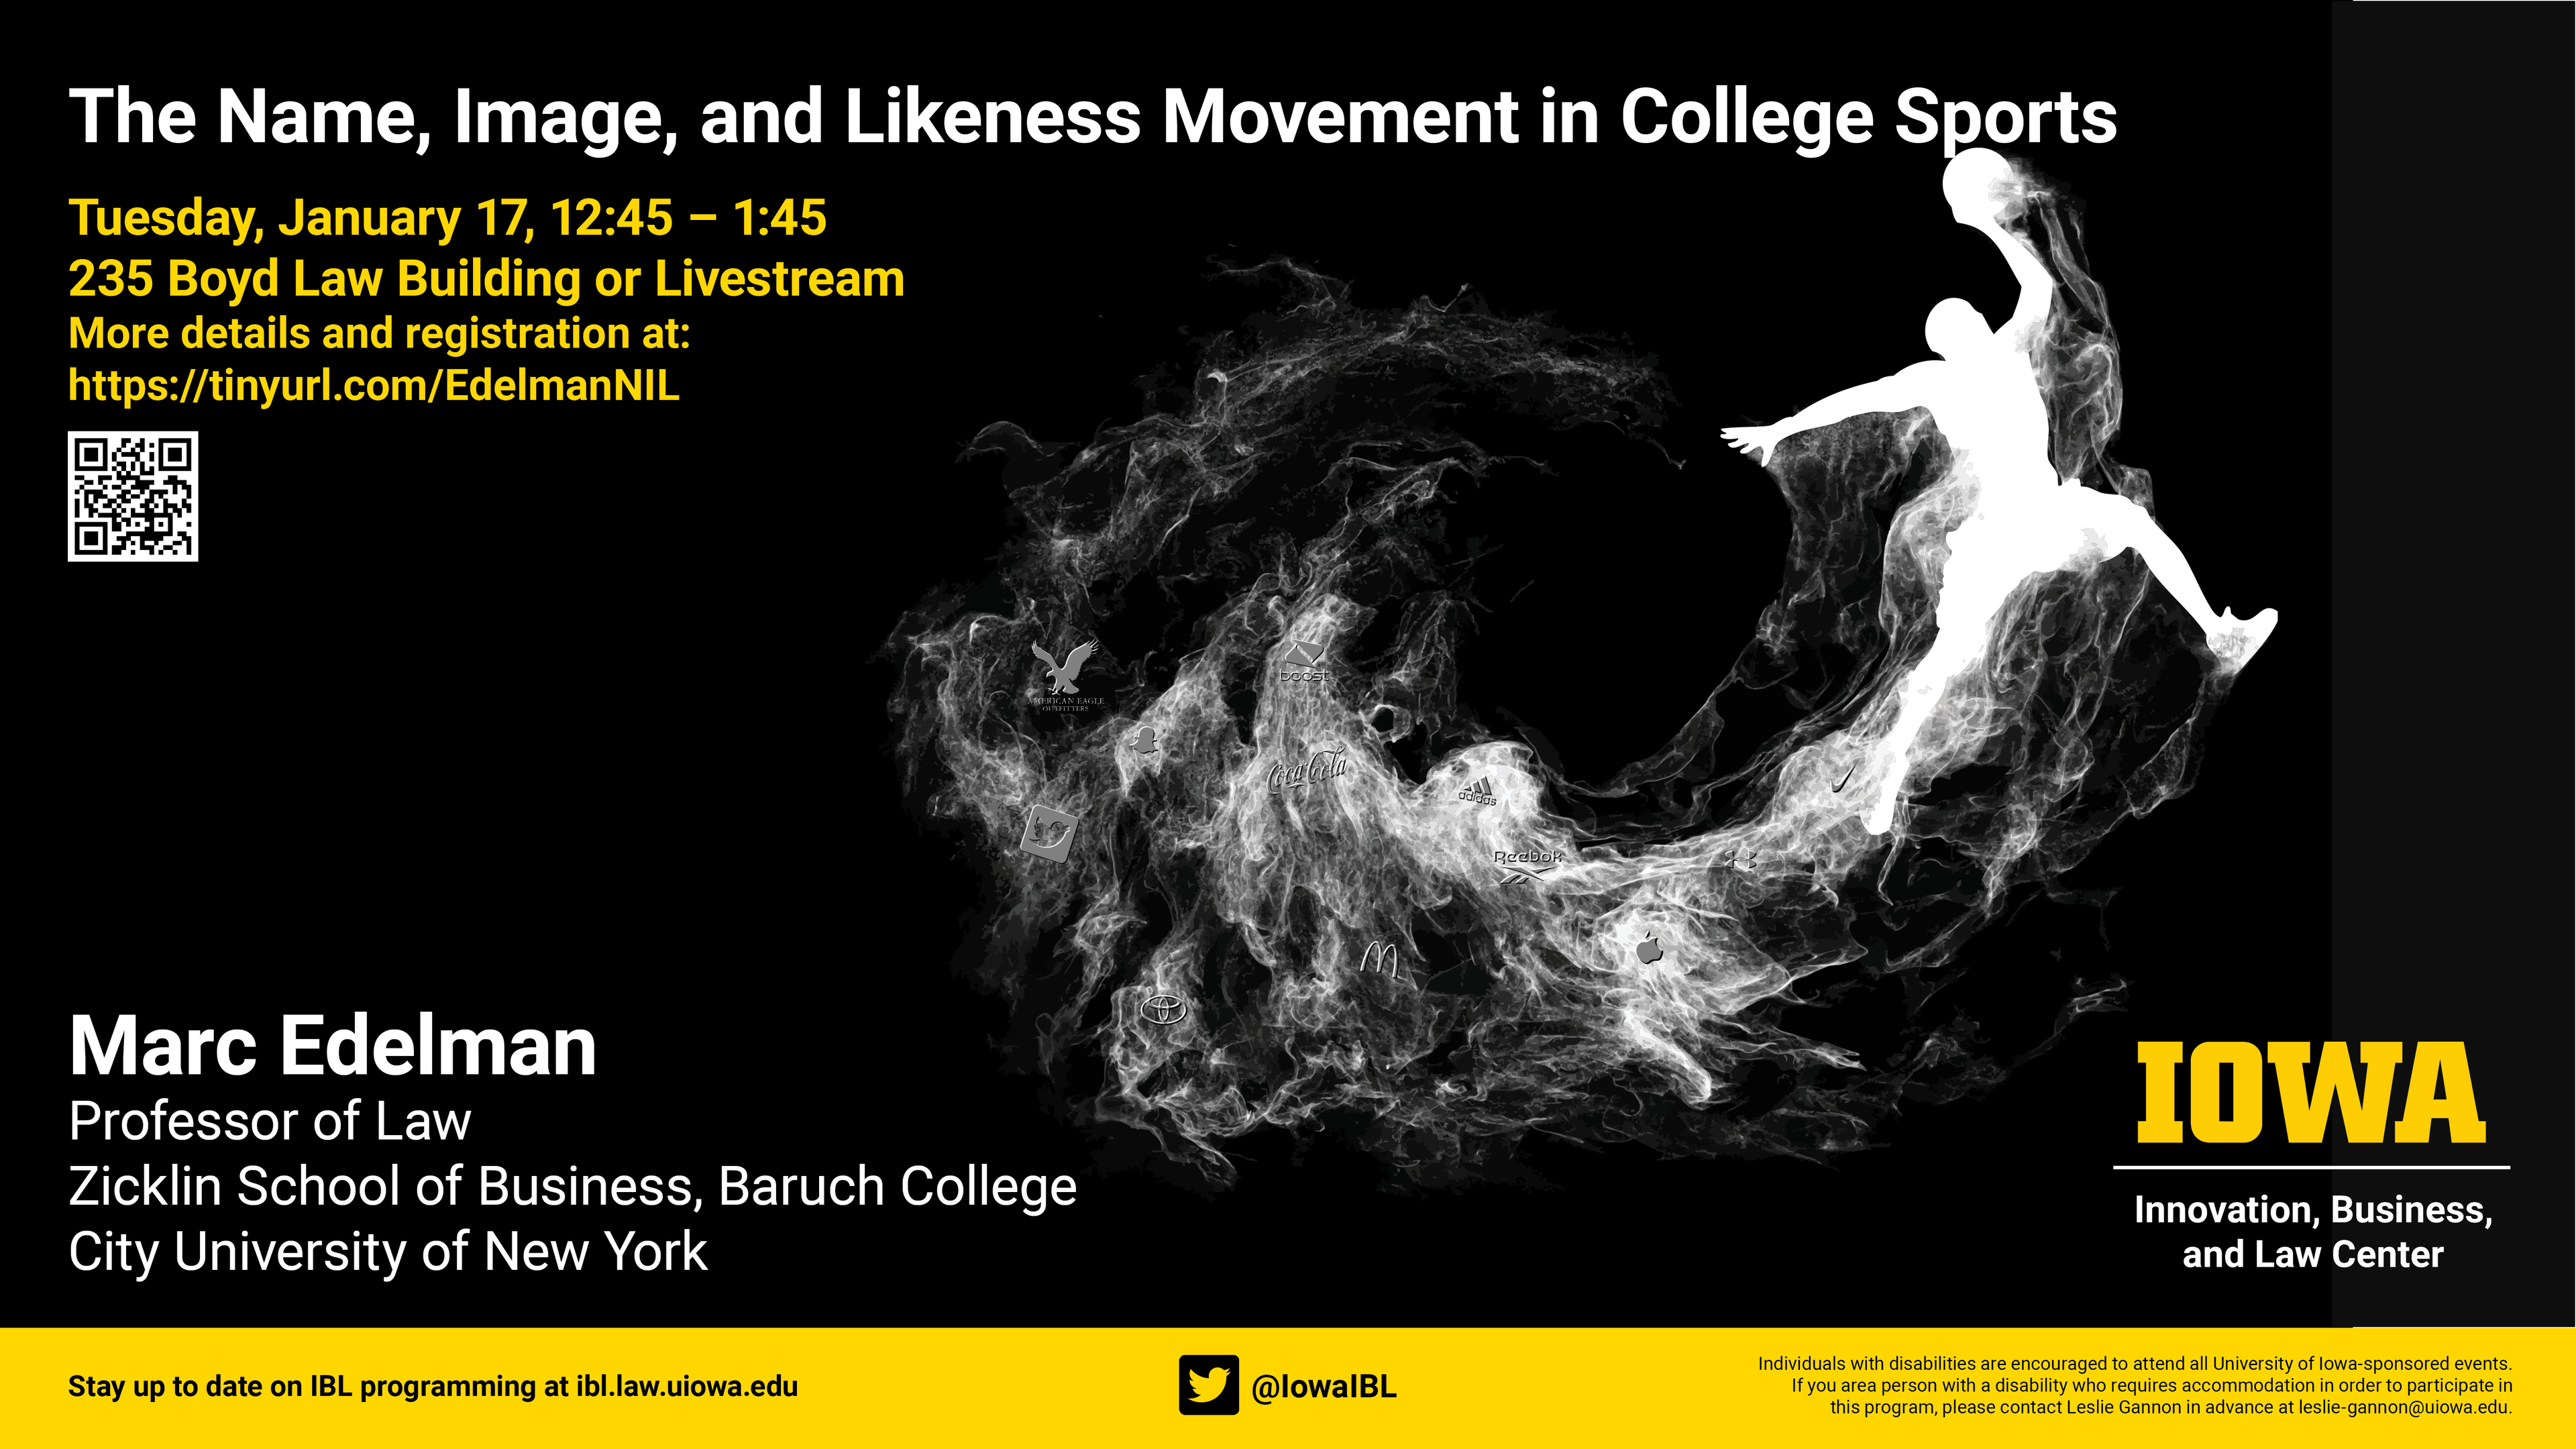  The name, image, and likeness movement in college sports    Tuesday, January 17, 12:45 - 1:45    235 Boyd Law Building or livestream    More details and registration at:    https://tinyurl.com/EdelmanNIL        Marc Edelman    Professor of Law    Zicklin School of Business, Baruch College    City University of New York